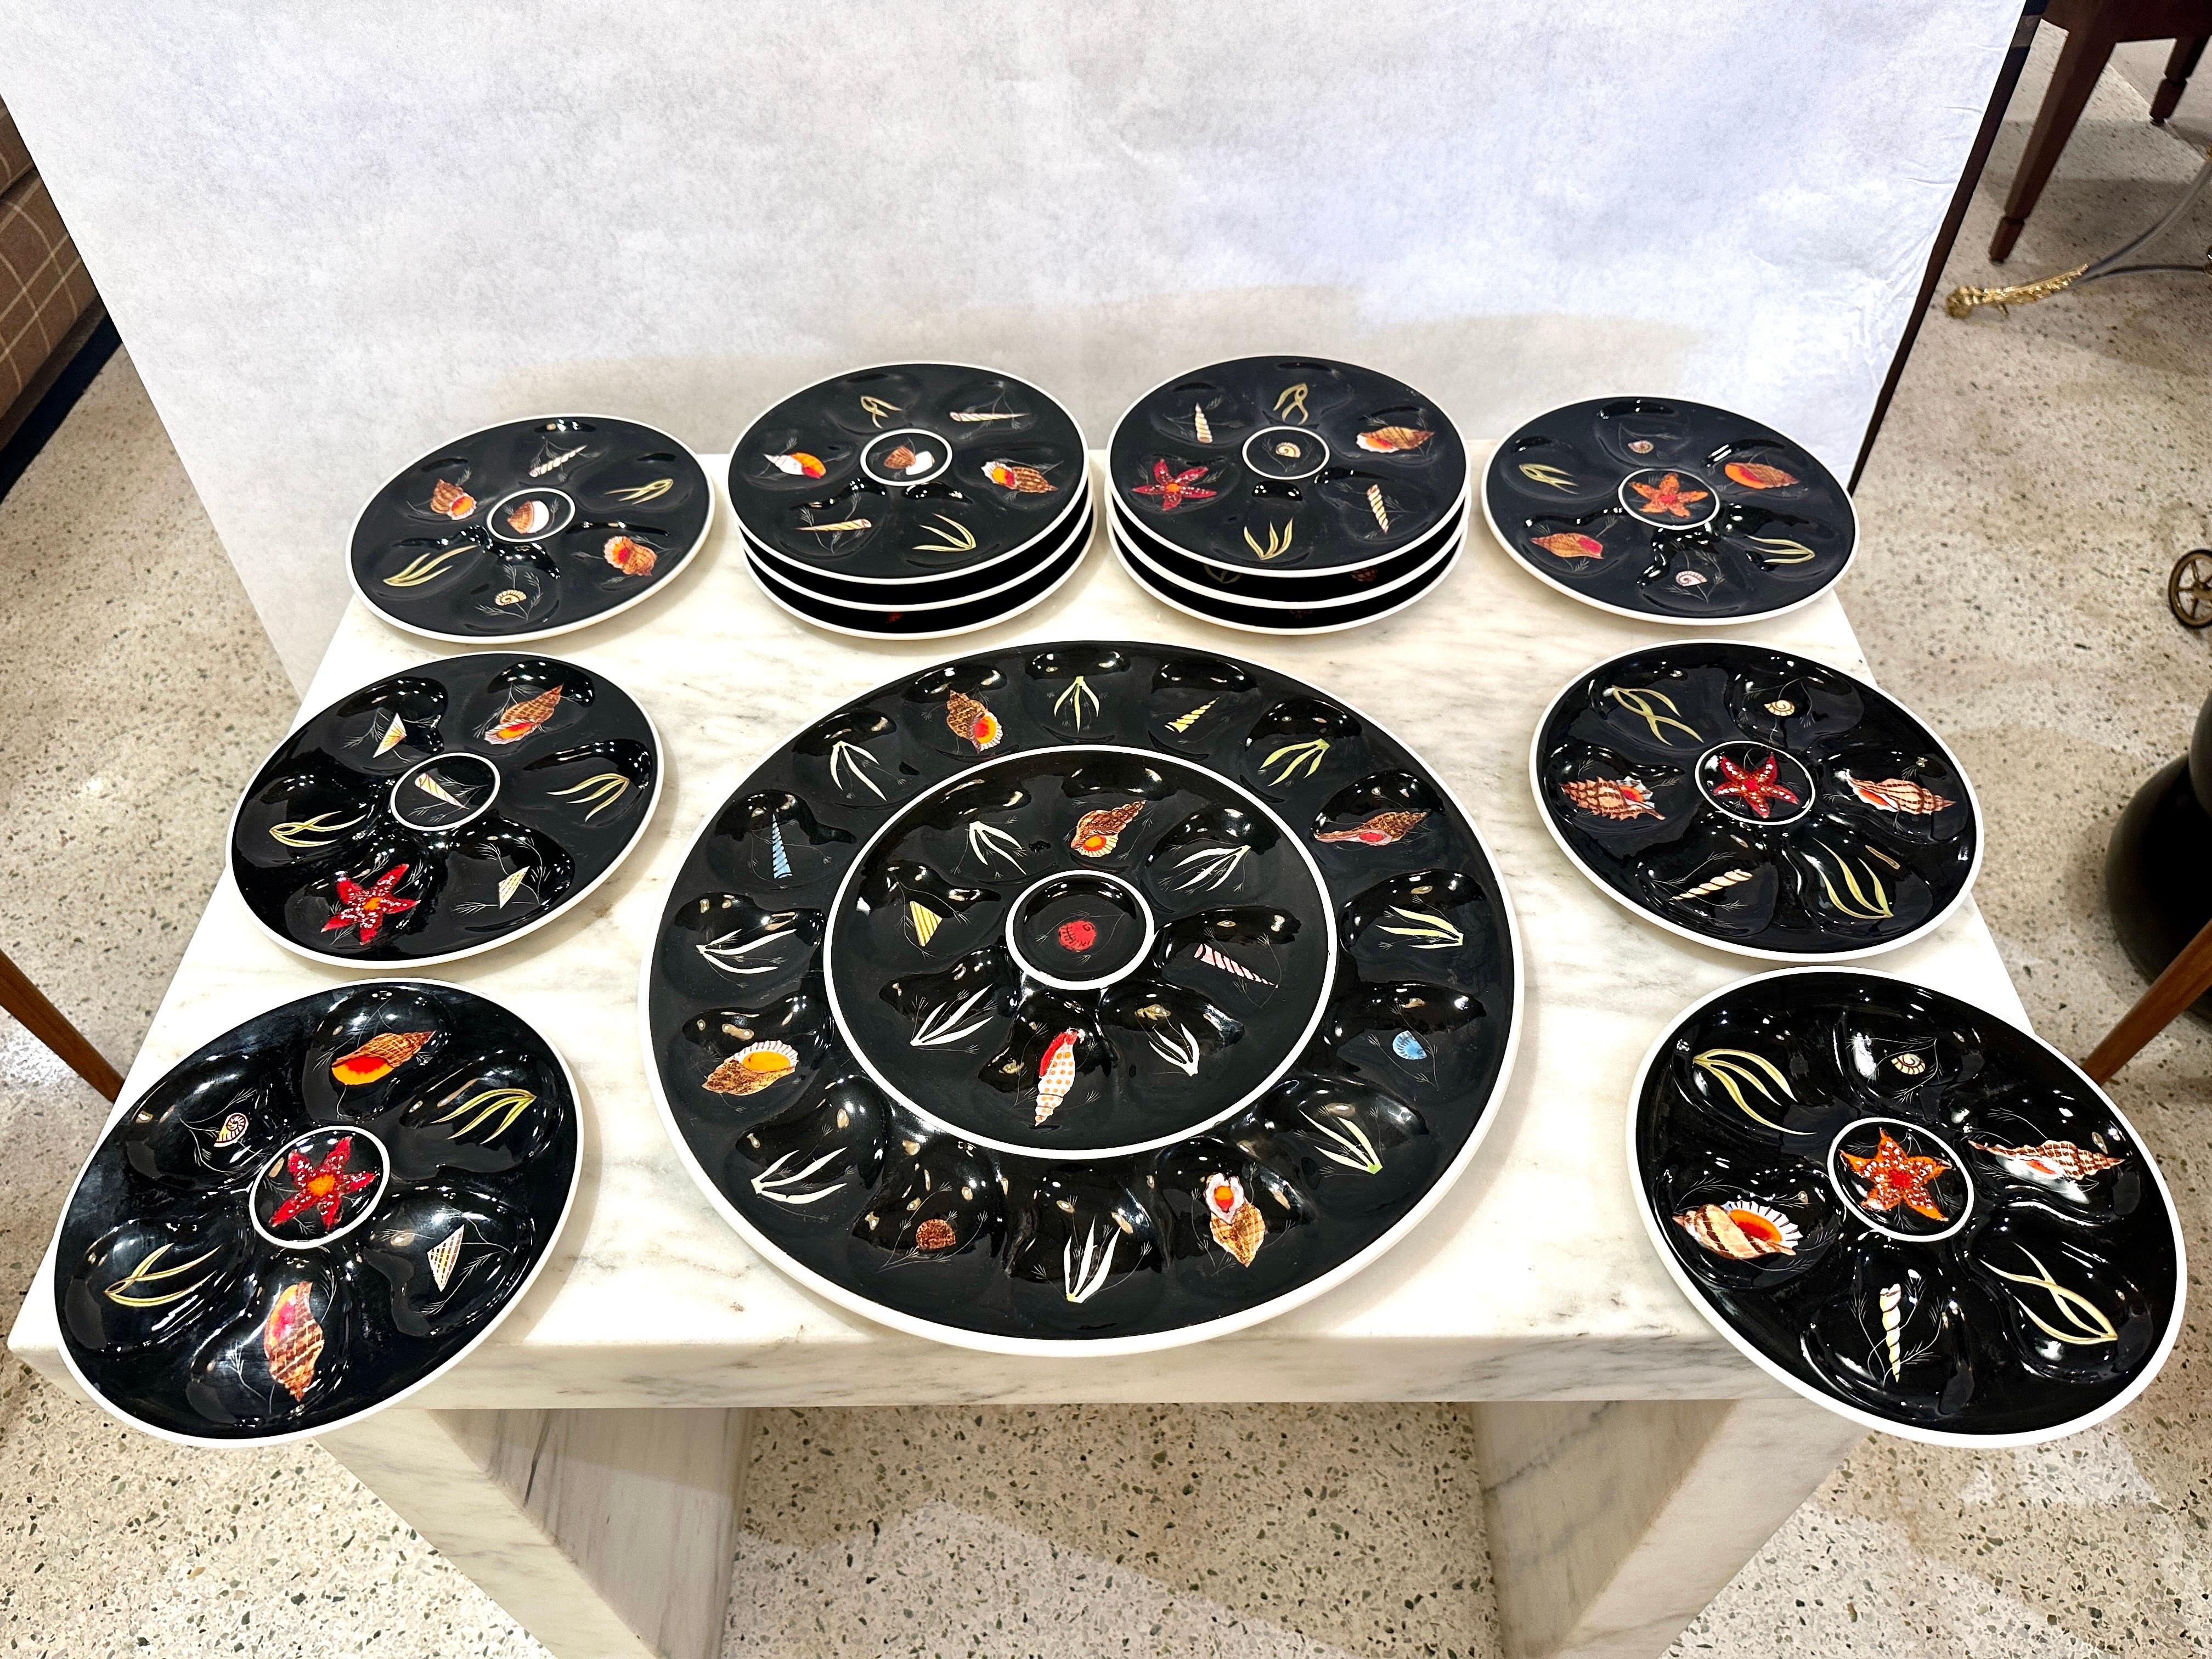 A RARE French Oyster Service Platter and 12 Plates by Henriot Quimper For Sale 7